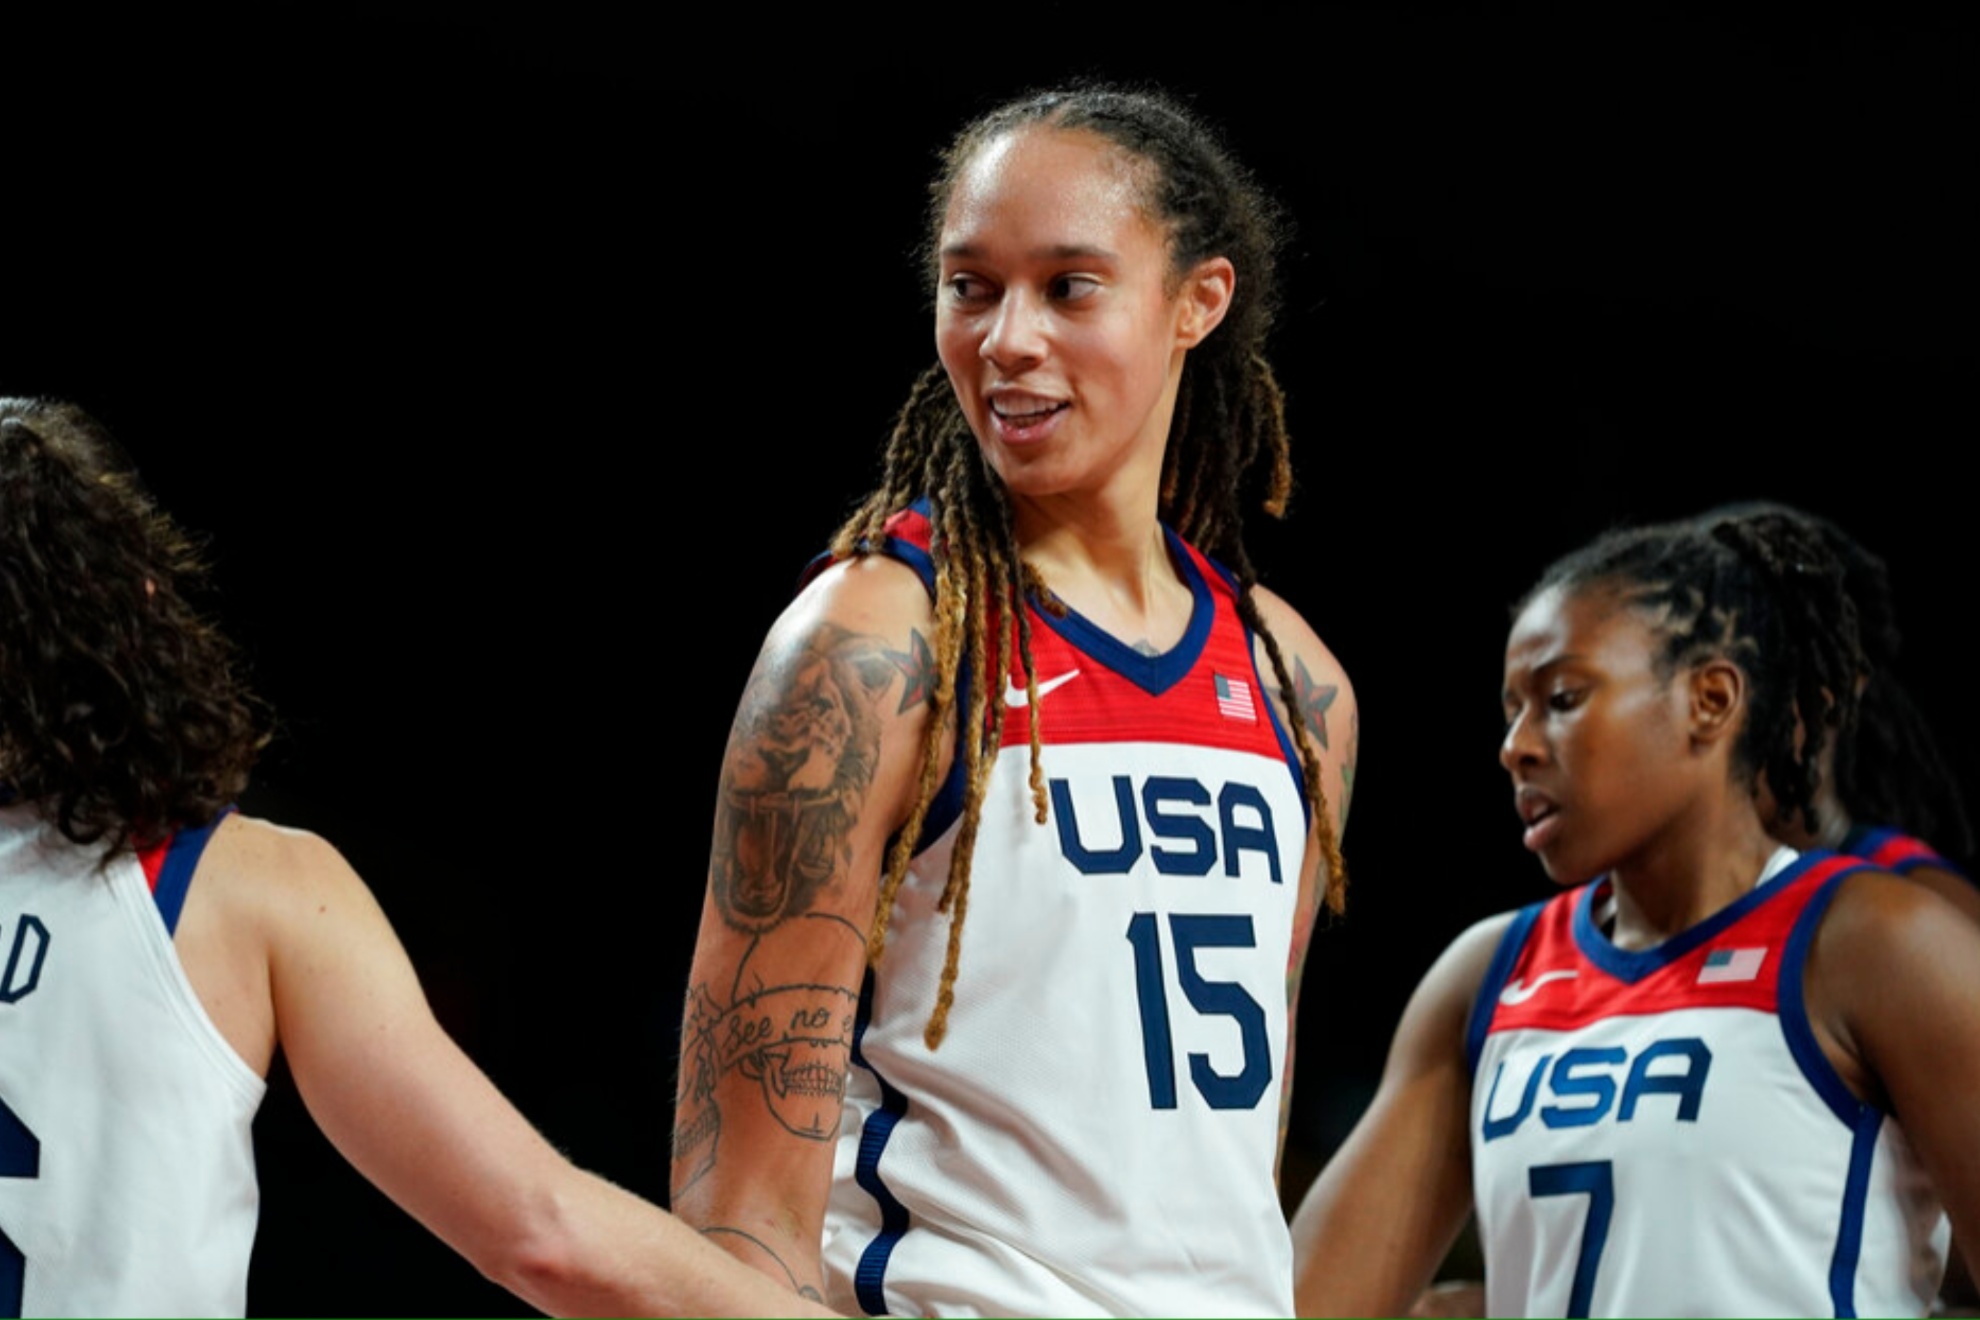 Brittany Griner is returning to Team USA since Tokyo Olympic Games